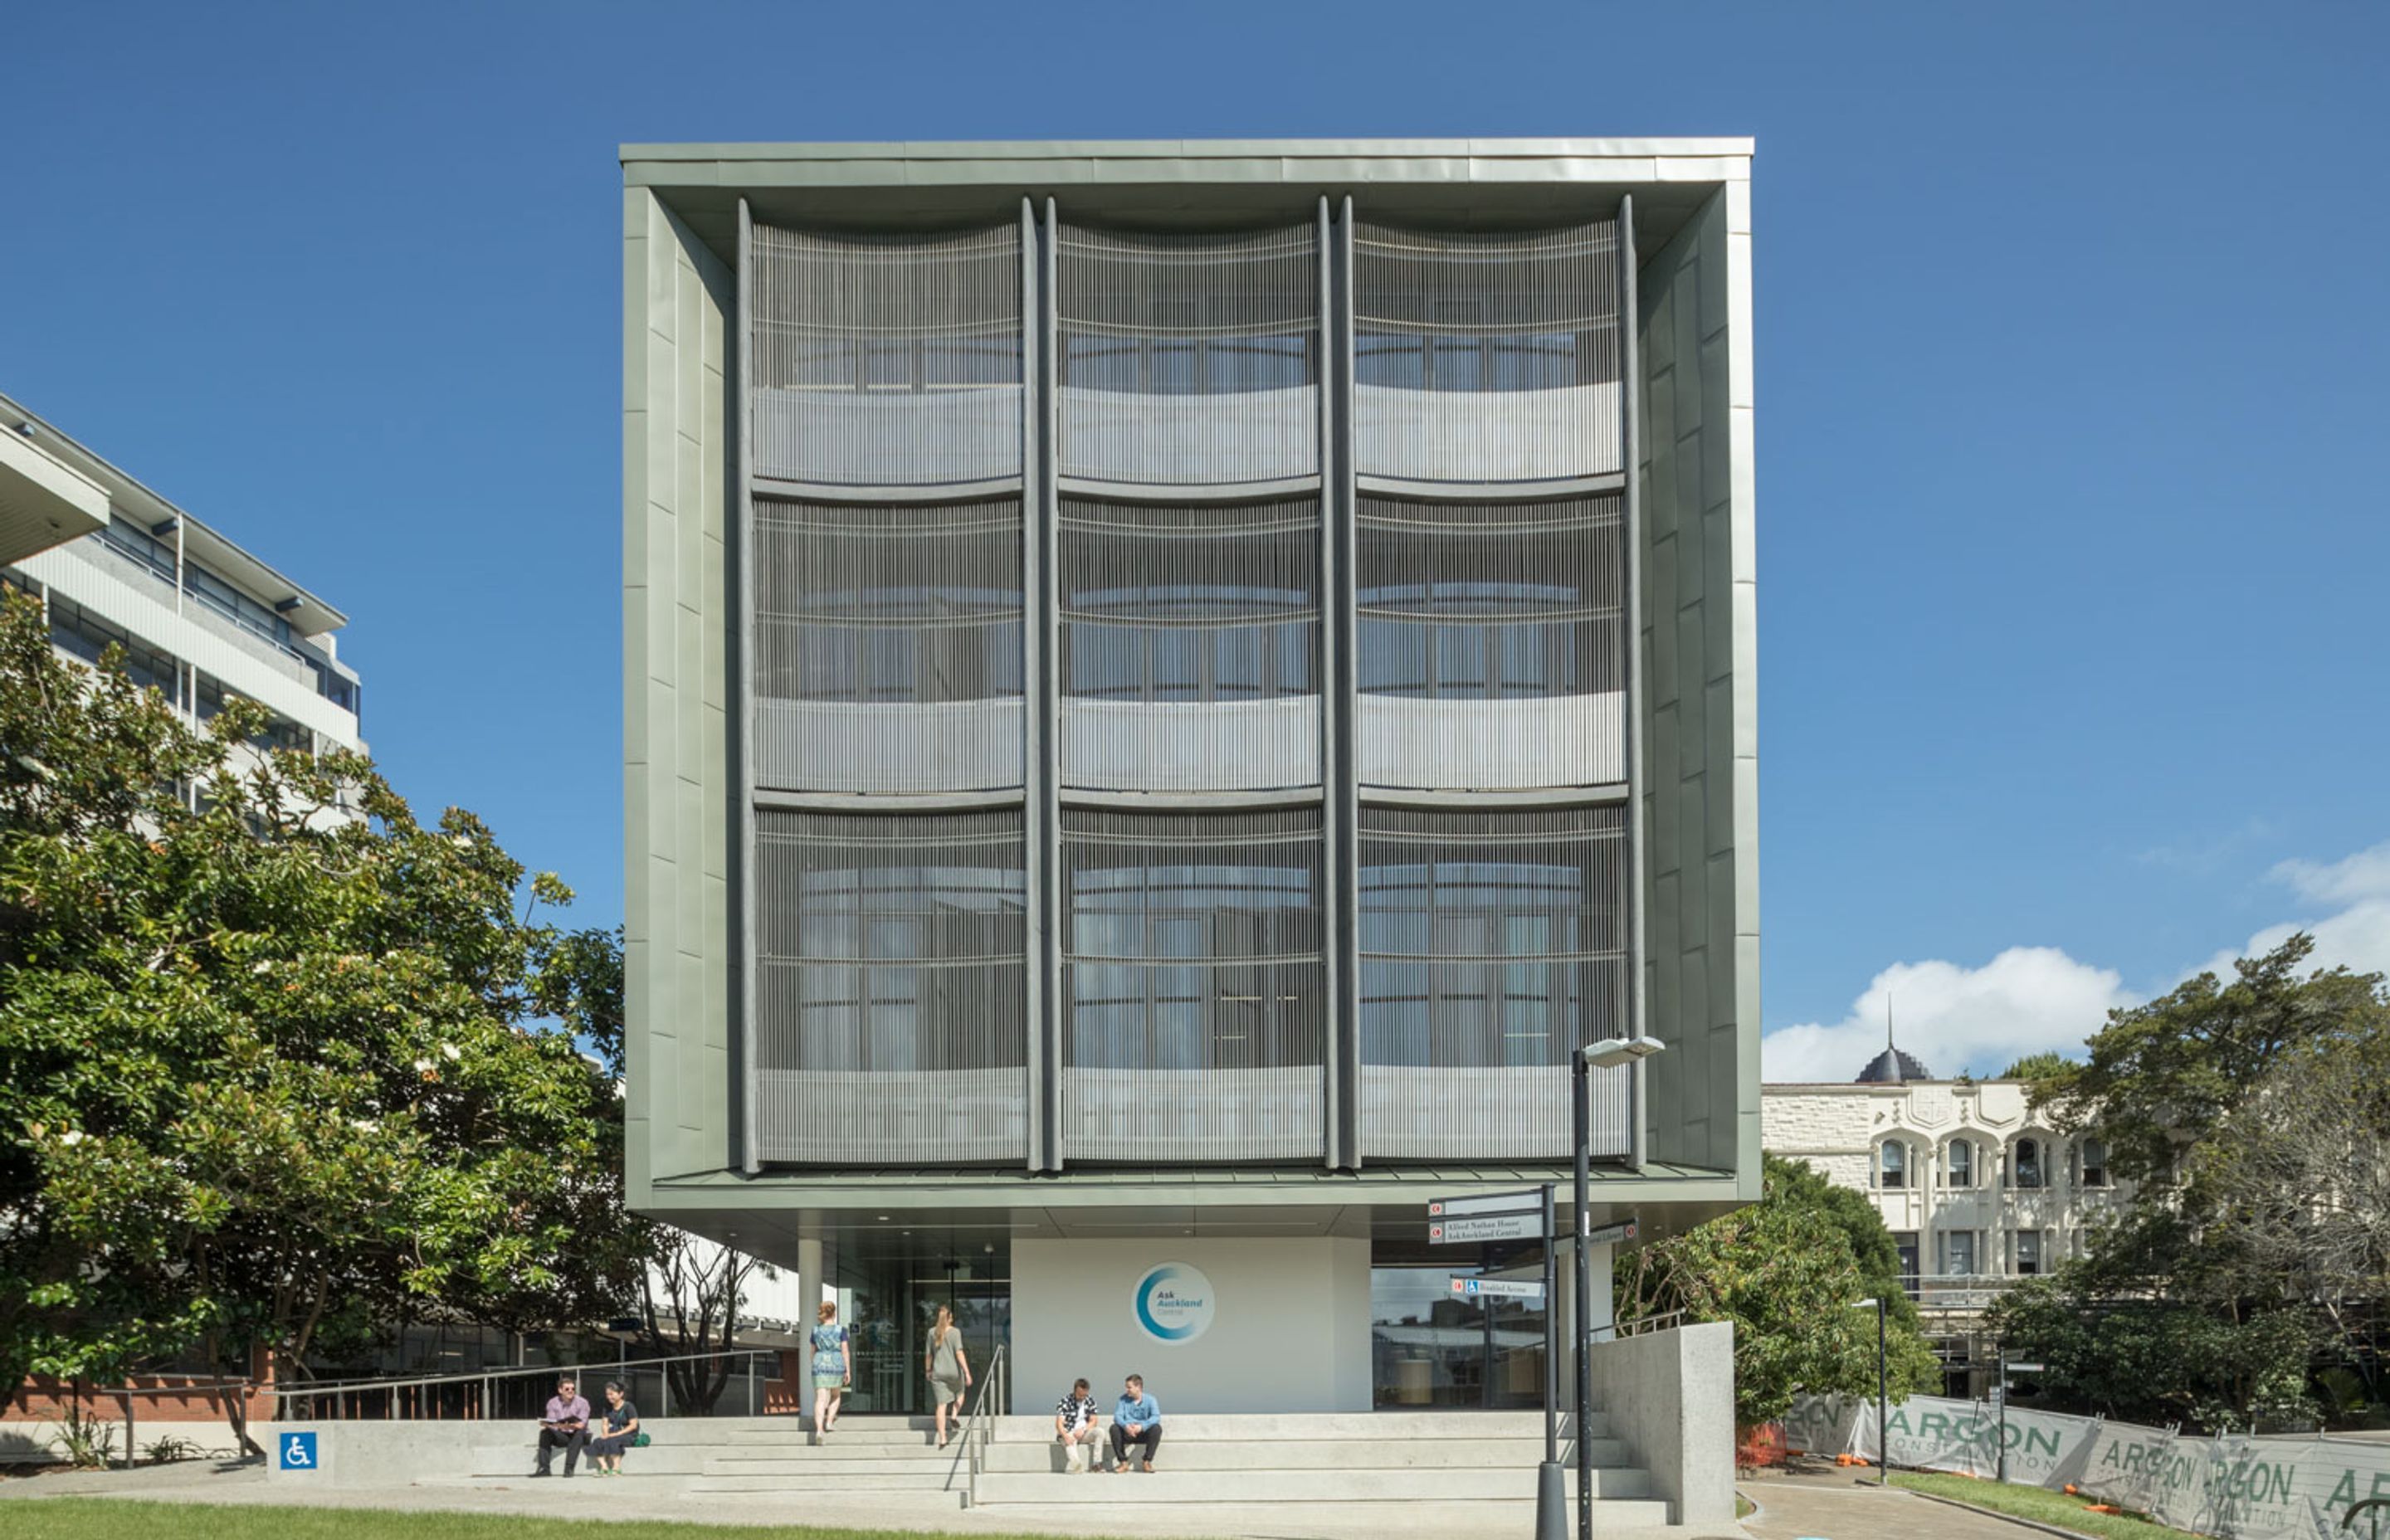 A senior associate at Architectus, Kitty has been involved in many residential, public, educational, and commercial projects, including the seismic upgrade, refurbishment and new extension work completed at the University of Auckland Waipapa Taumata Rau​’s Alfred Nathan House | Photography by Simon Devitt